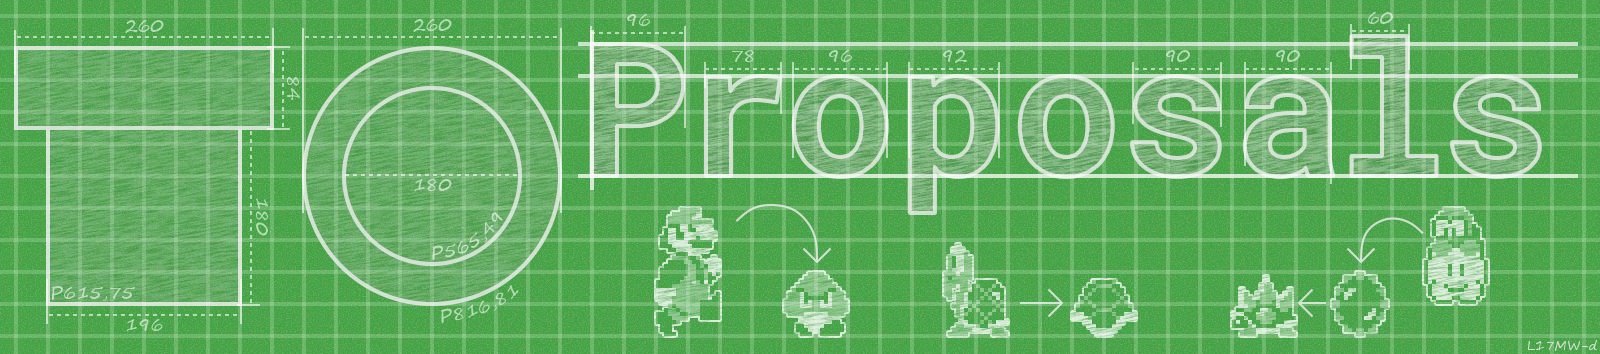 proposalsFull.0.4.png